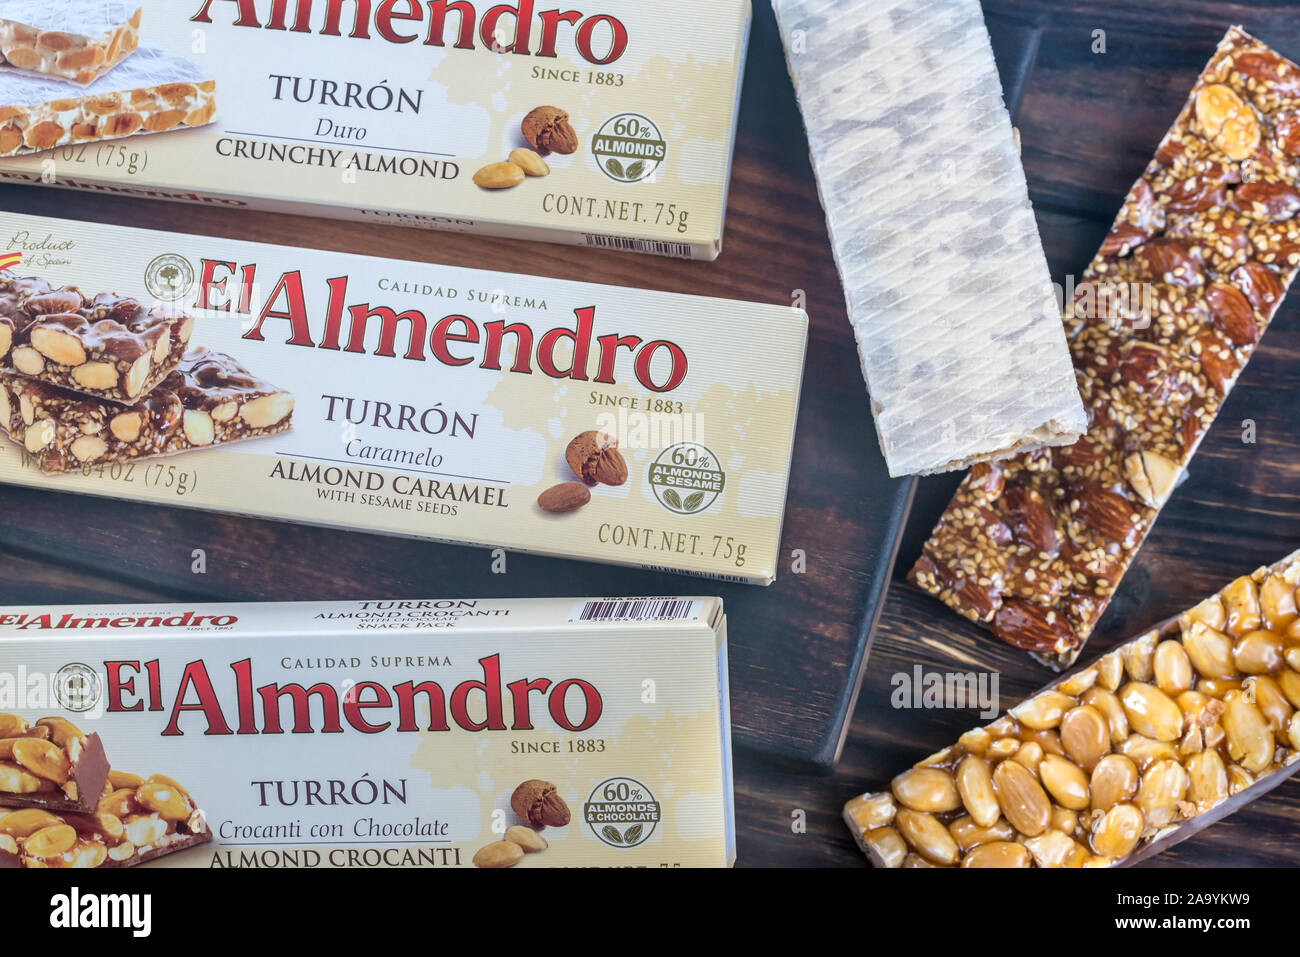 SUMY, UKRAINE - DEC 8, 2017: El Almendro turron packs on the wooden board.  Turron is confection made of roasted nuts, caramelized sugar and egg whites  Stock Photo - Alamy